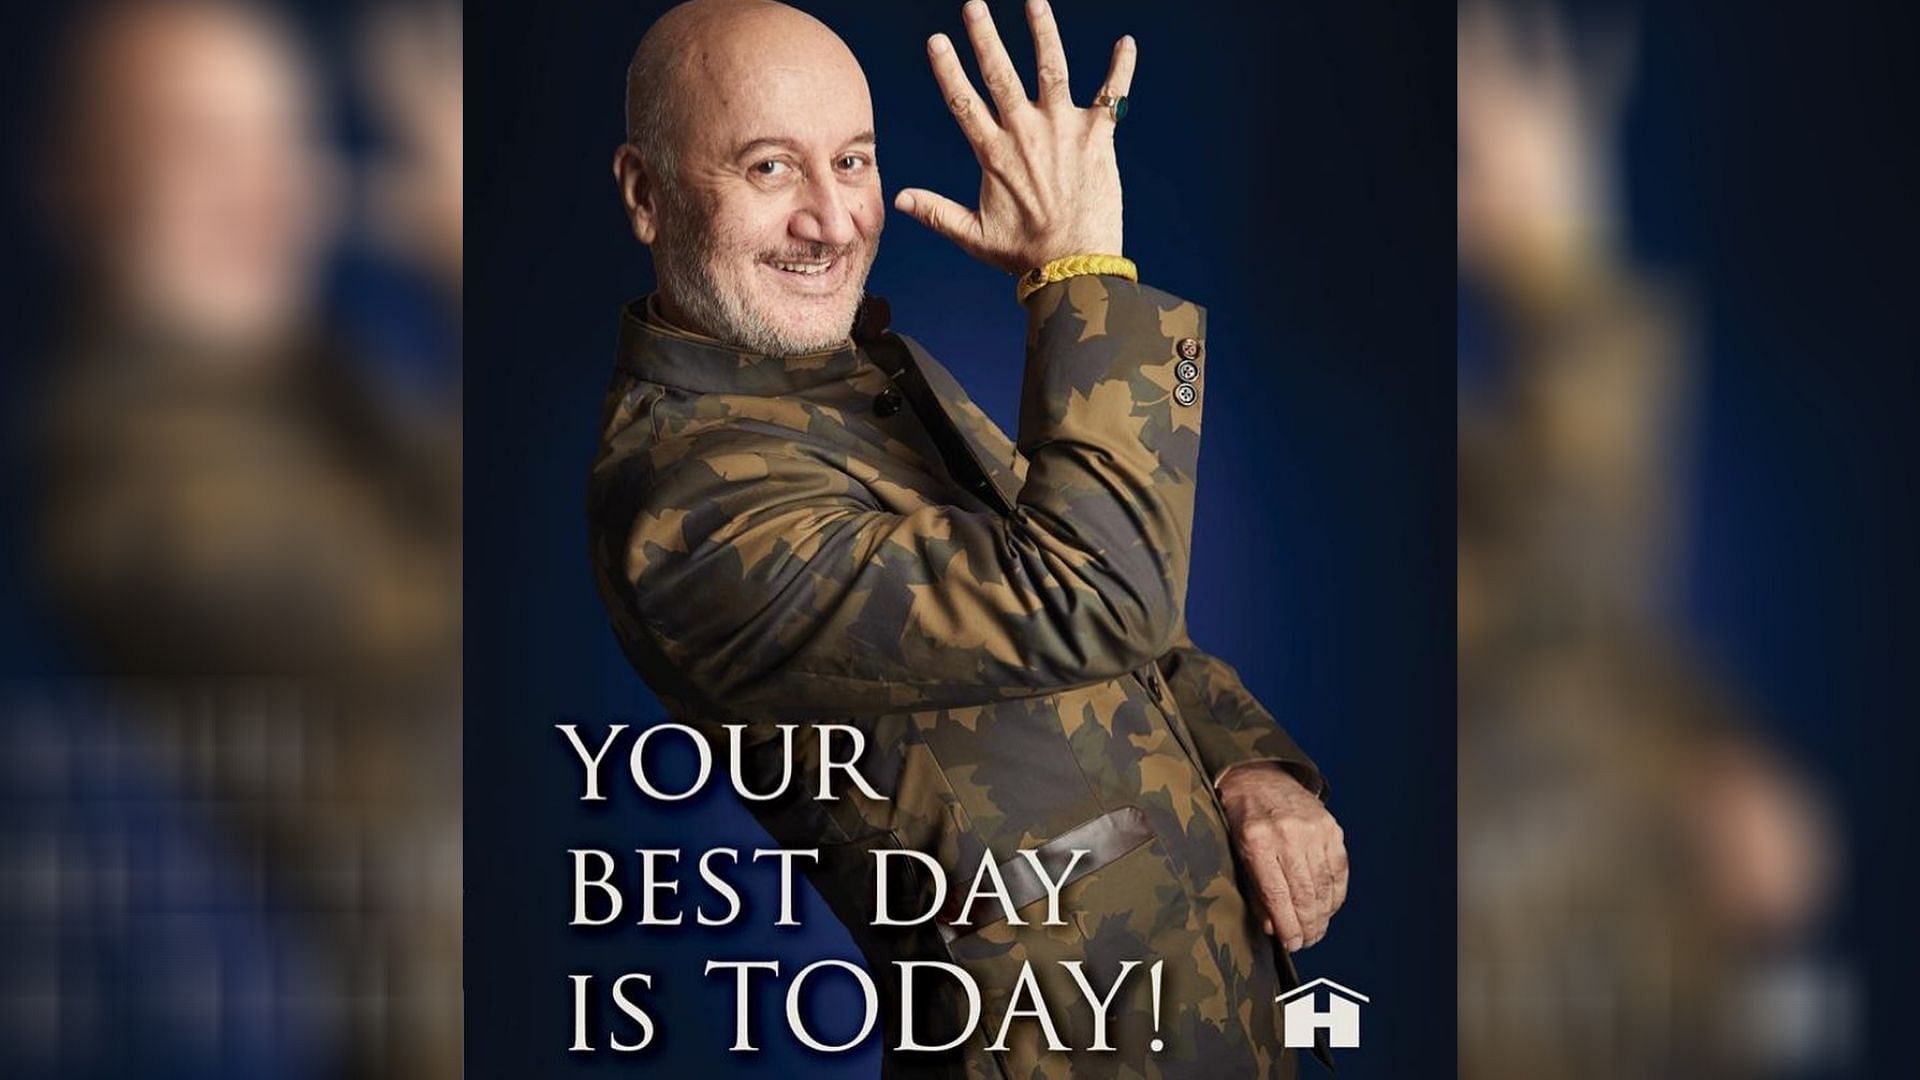 Anupam Kher's new book is called 'Your Best Day Is Today.'